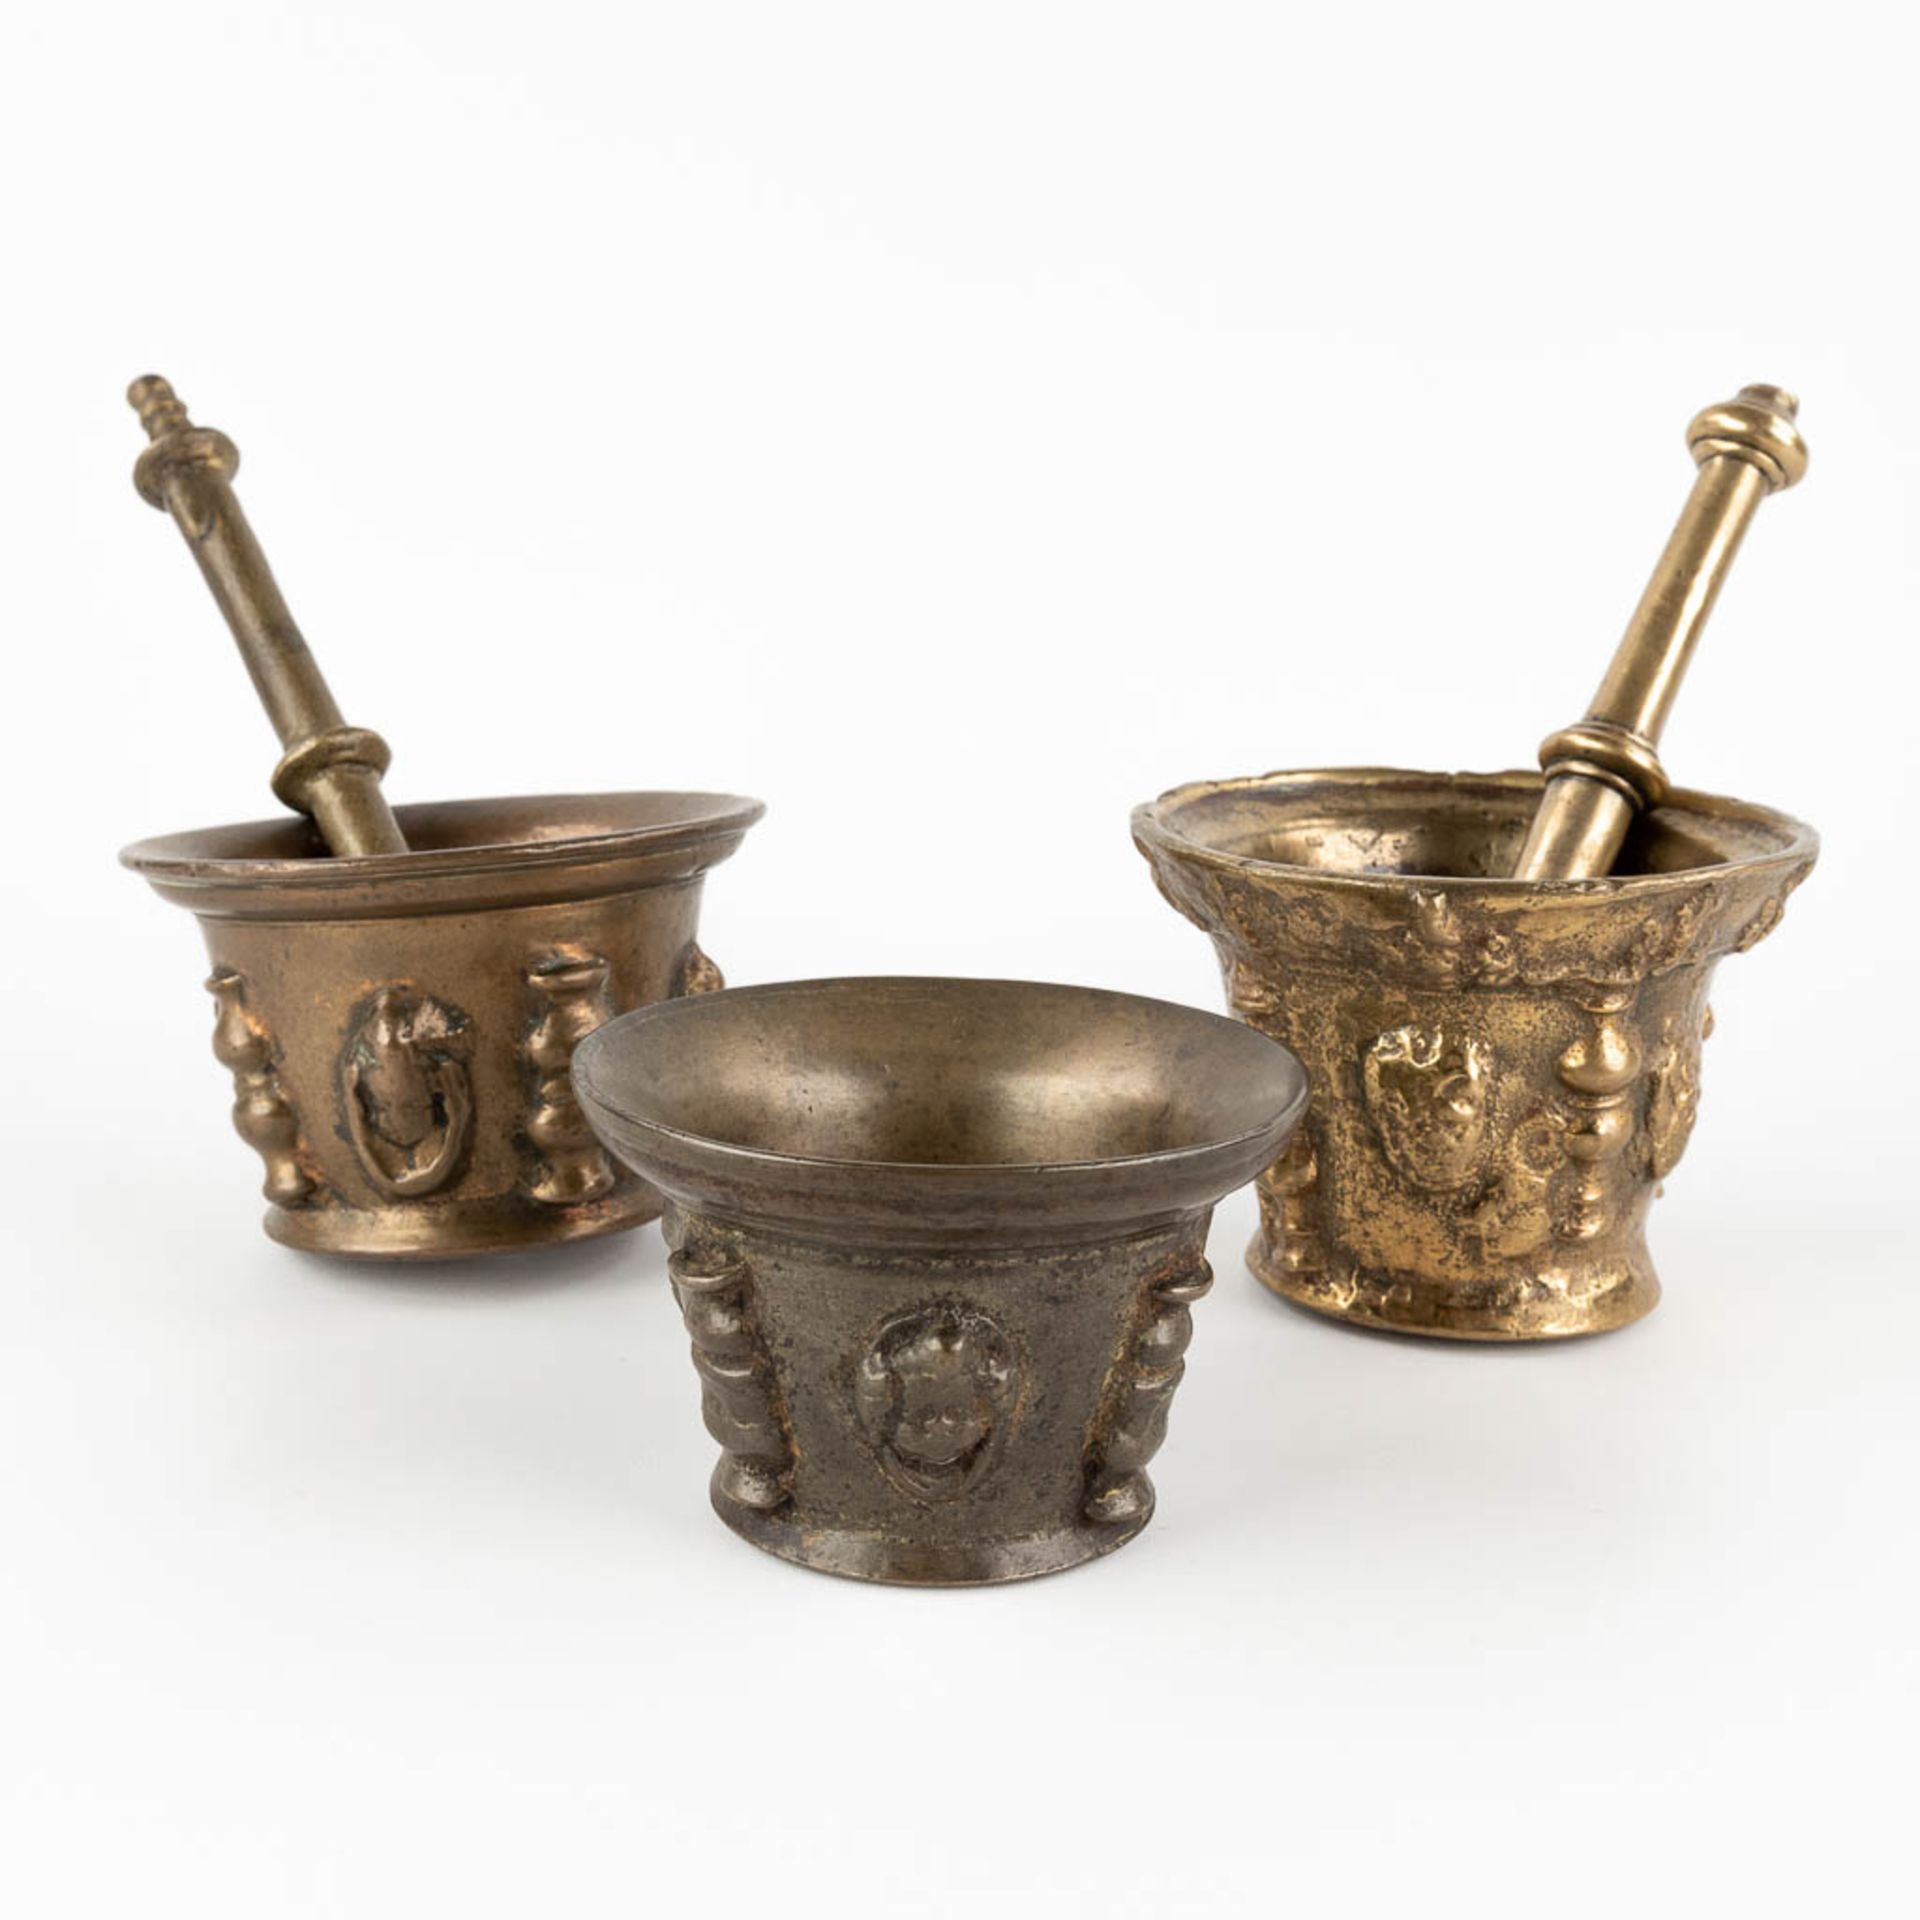 Three antique mortars with two pestles, bronze. Probably Spain, 17th/18th C. (H:9 x D:13 cm)